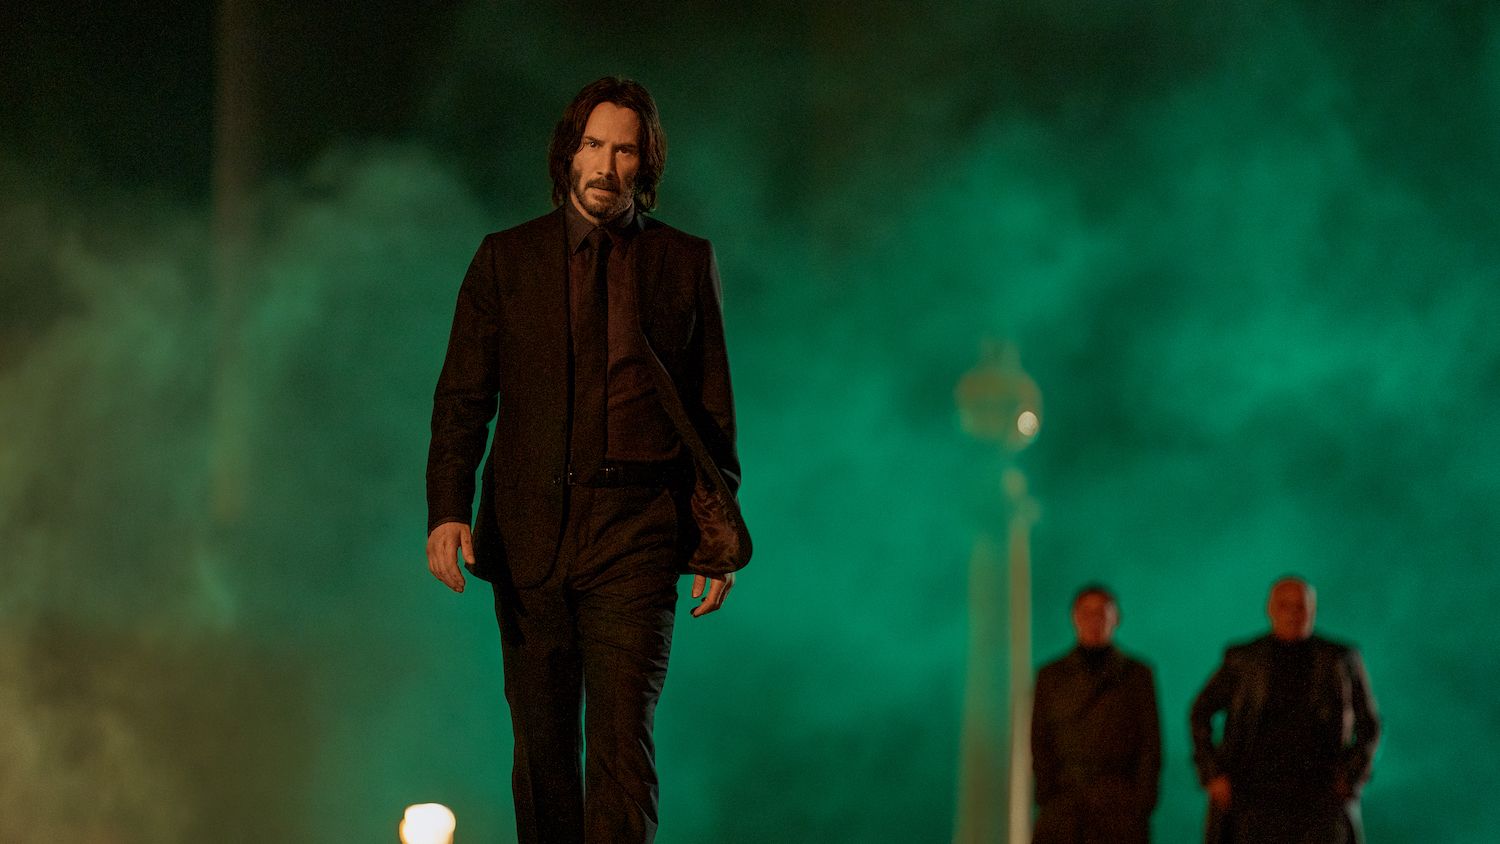 TV Review: The Continental: From the World of John Wick – Josh at